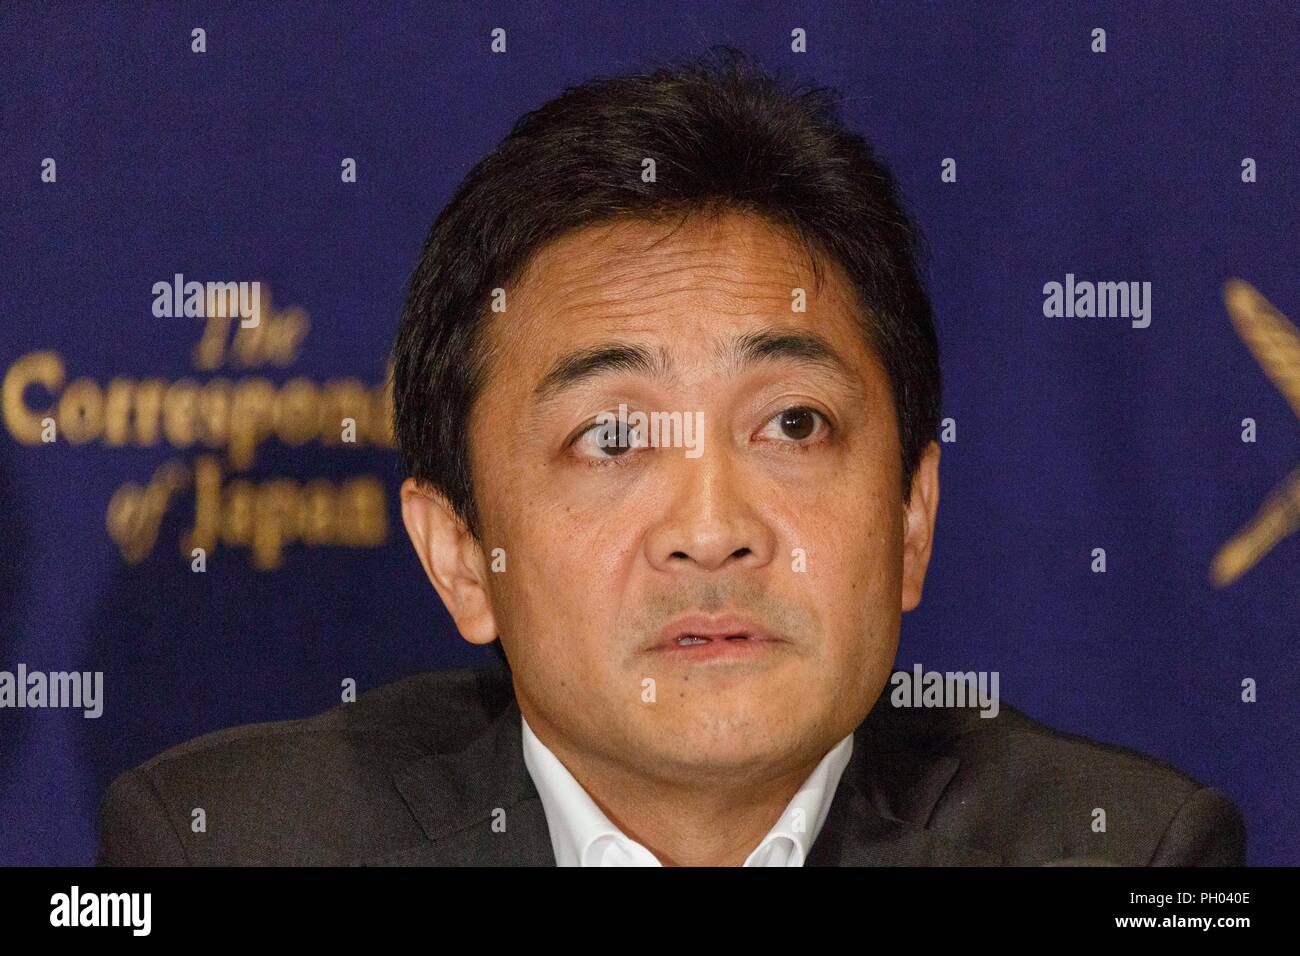 Tokyo, Japan. 29th Aug 2018. Japanese politician and candidate for his party's leadership Yuichiro Tamaki attends a news conference at the Foreign Correspondents' Club of Japan on August 29, 2018, Tokyo, Japan. Tamaki and Keisuke Tsumura answered questions about the coming leadership election for the Democratic Party For the People, which is set for September 4. Credit: Rodrigo Reyes Marin/AFLO/Alamy Live News Stock Photo